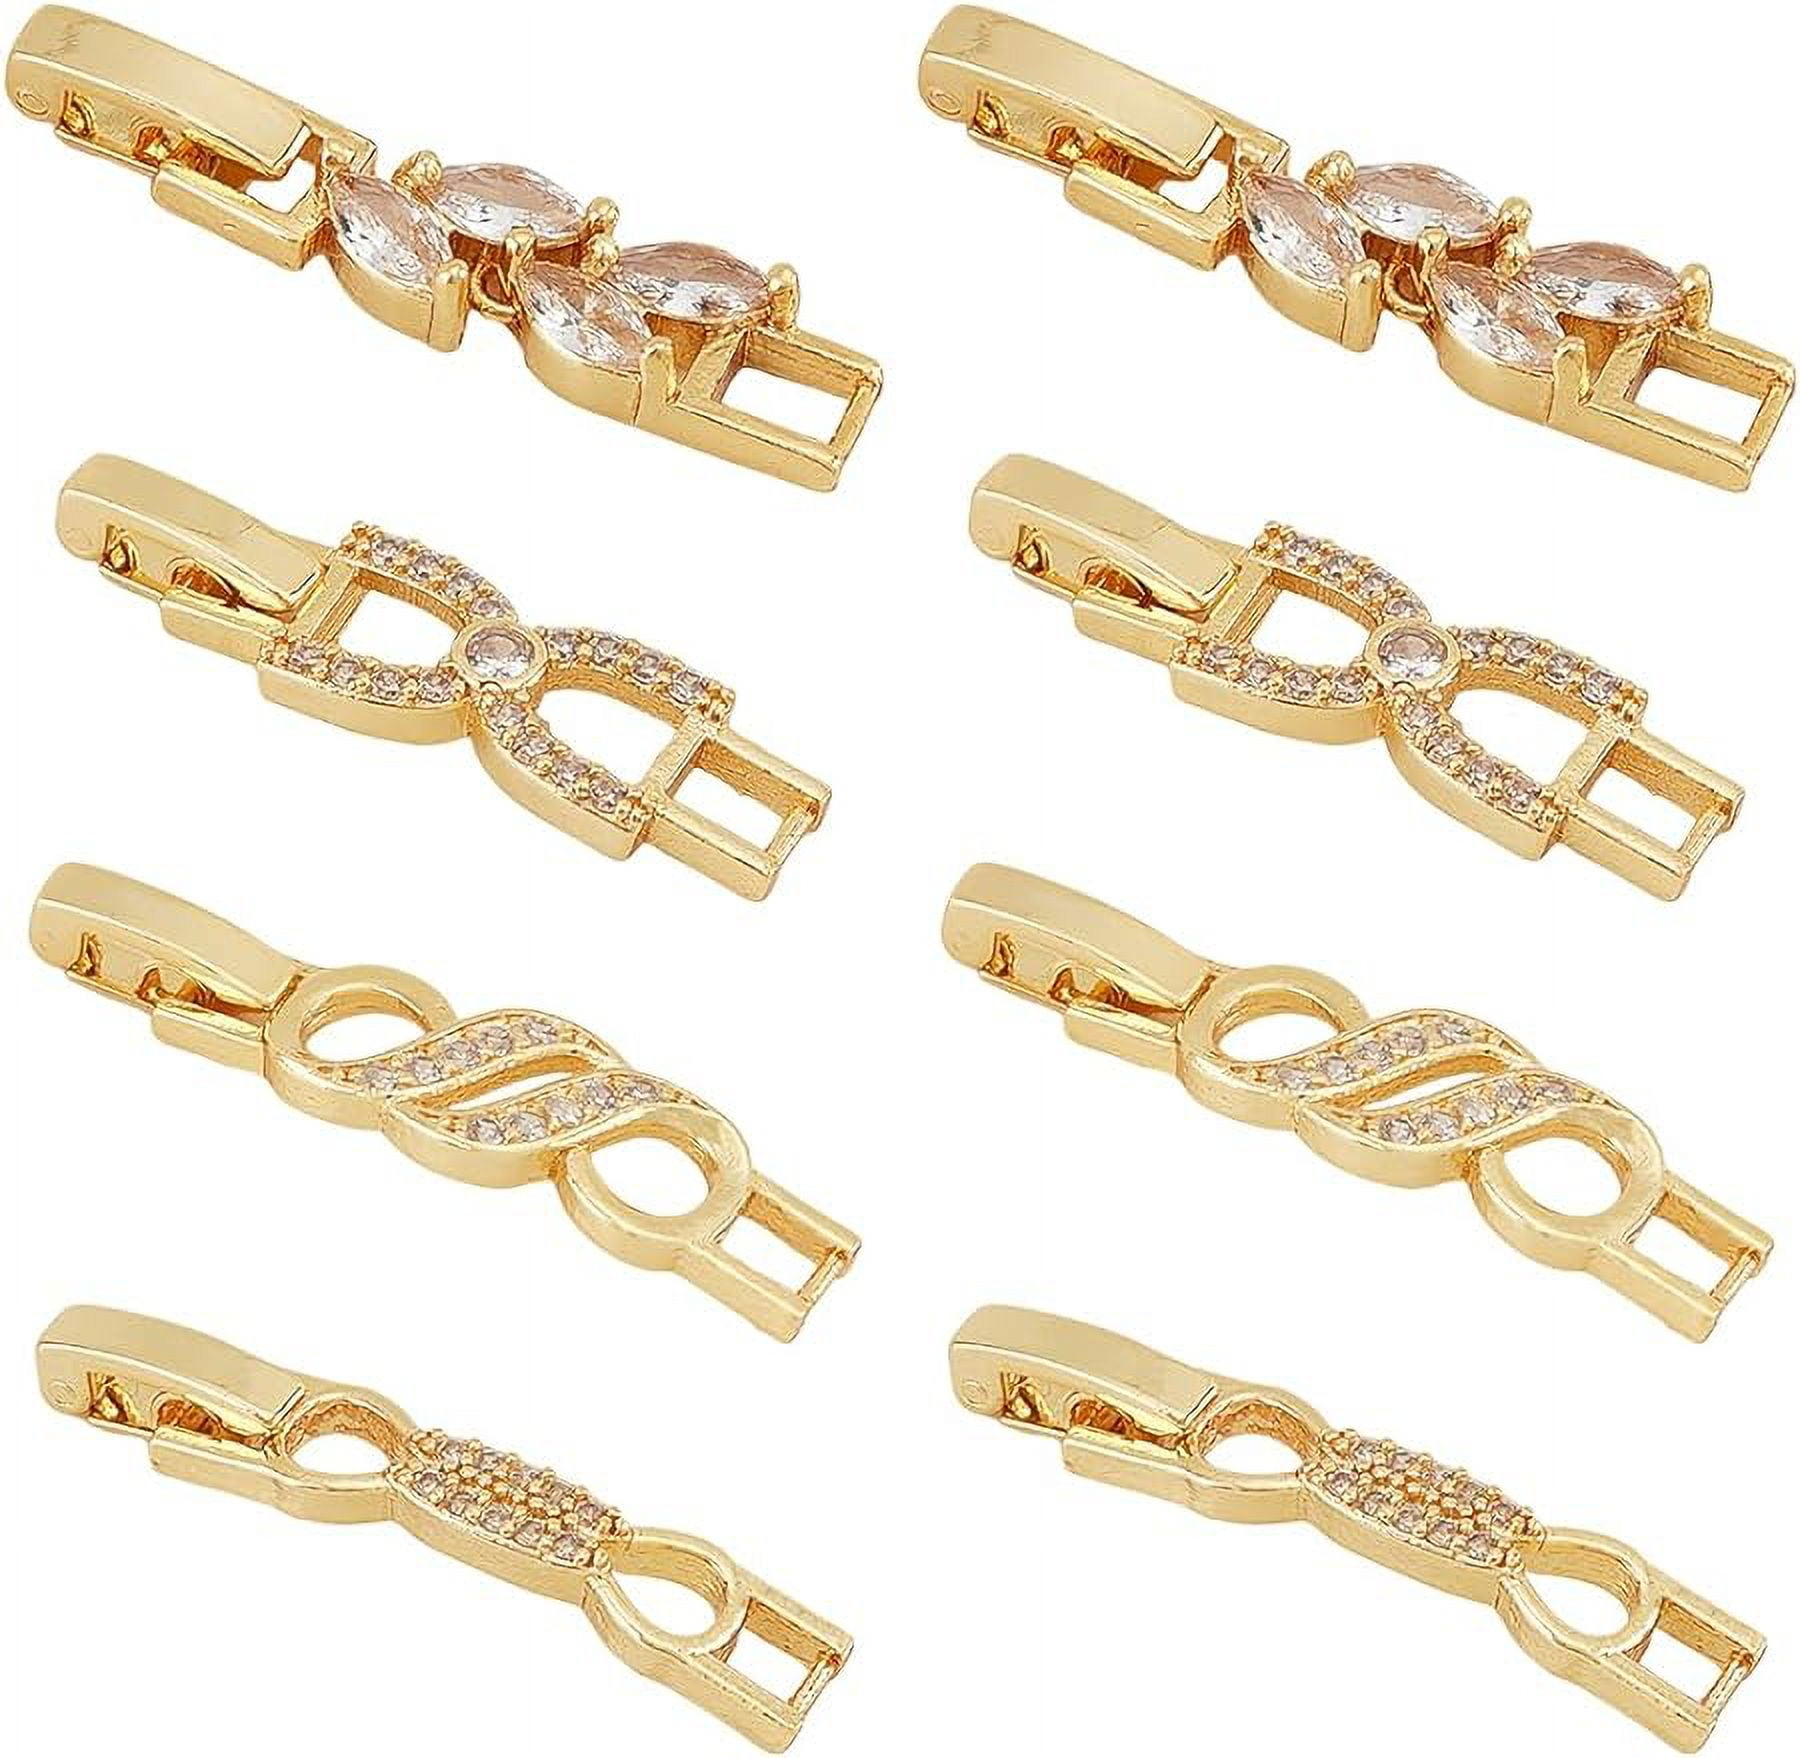 8Pcs necklace separator Layered Necklace Clasp Magnetic Jewelry Clasps for